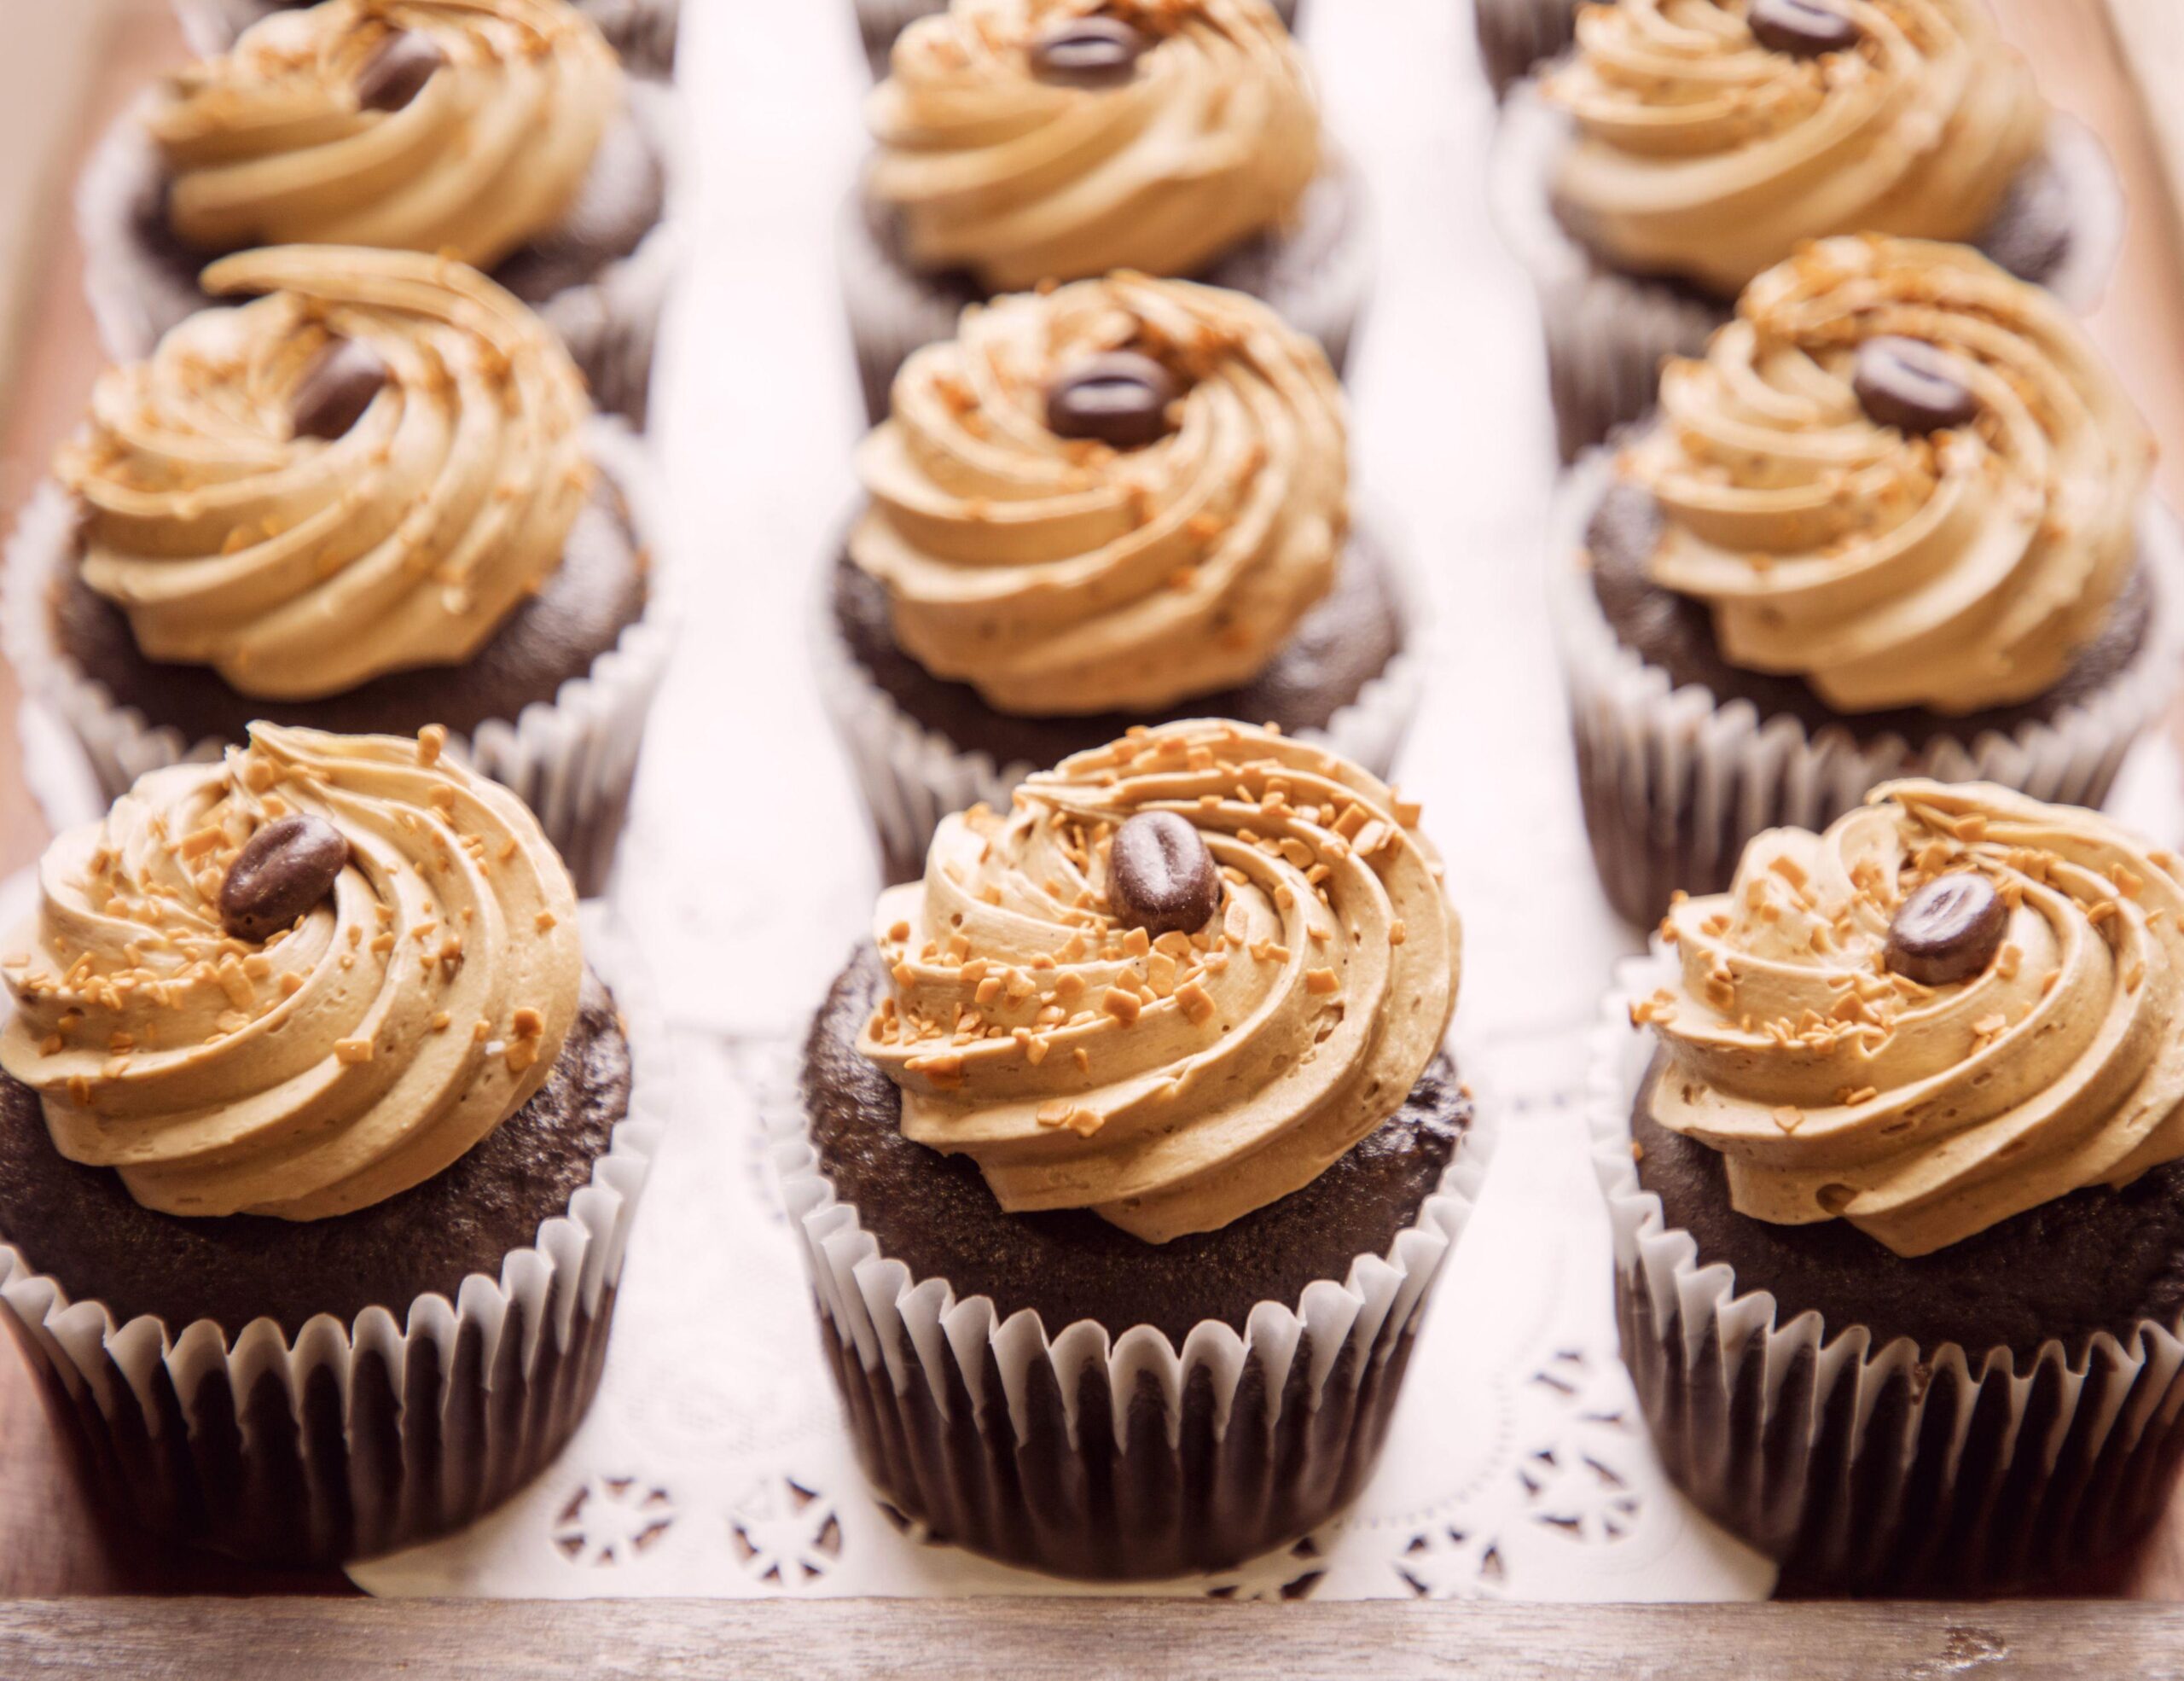  Treat yourself to a delicious and decadent dessert with our Mocha Cupcakes.